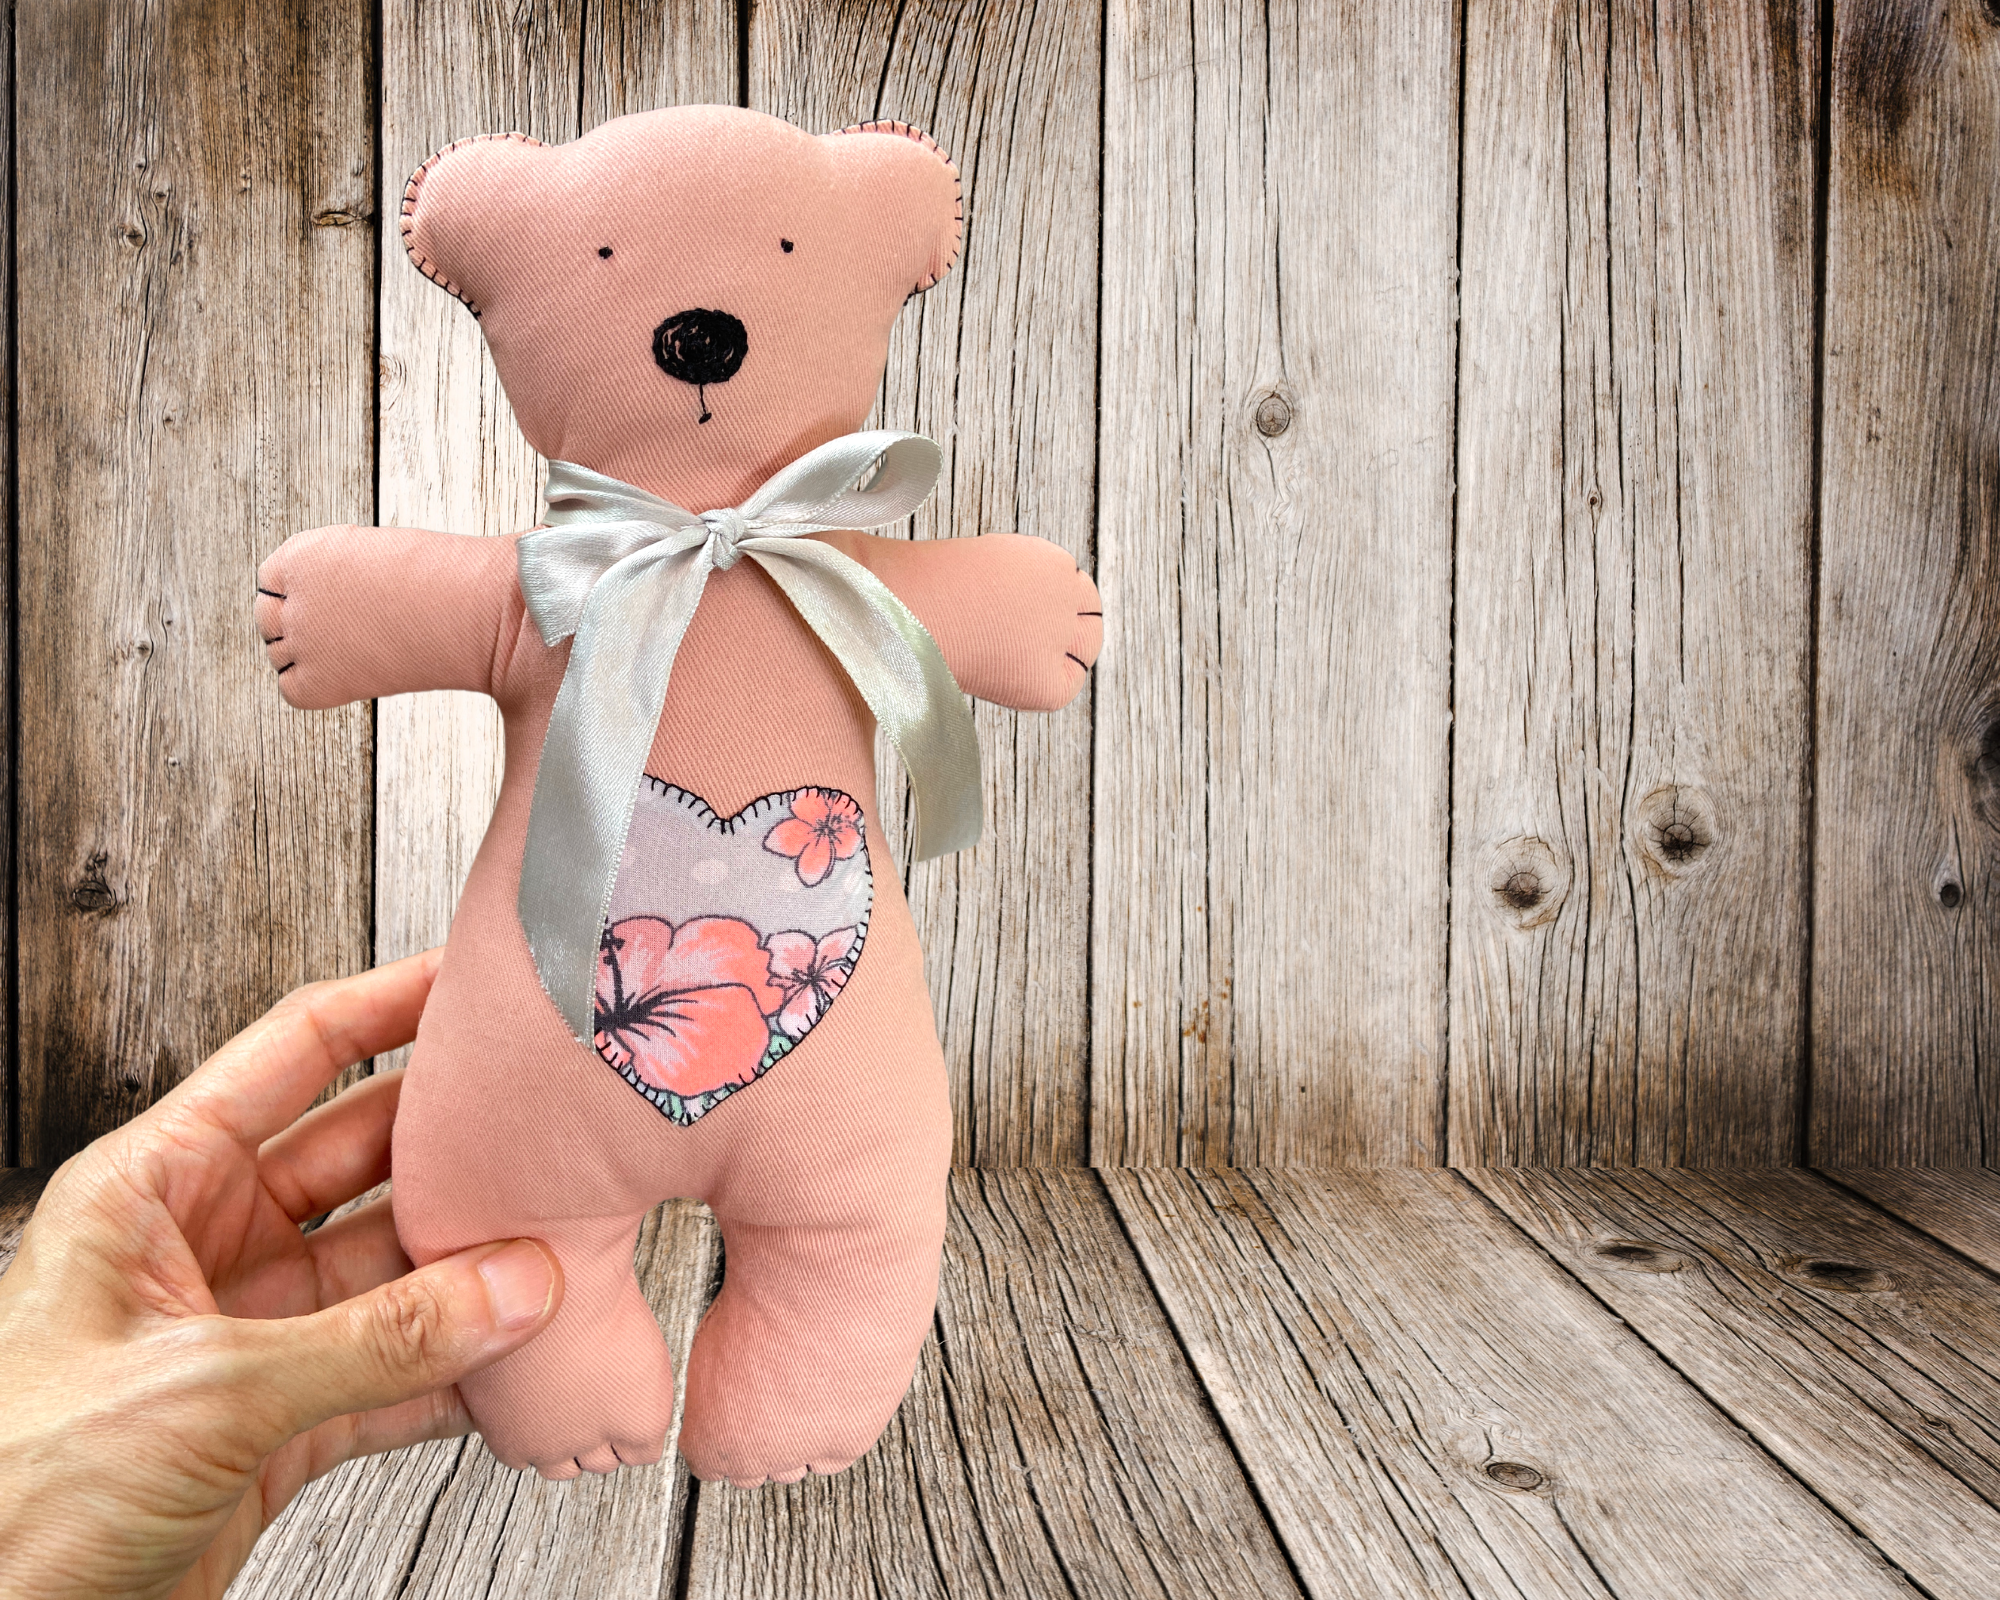 Handcrafted Collectors Teddy Bear - Sweetee